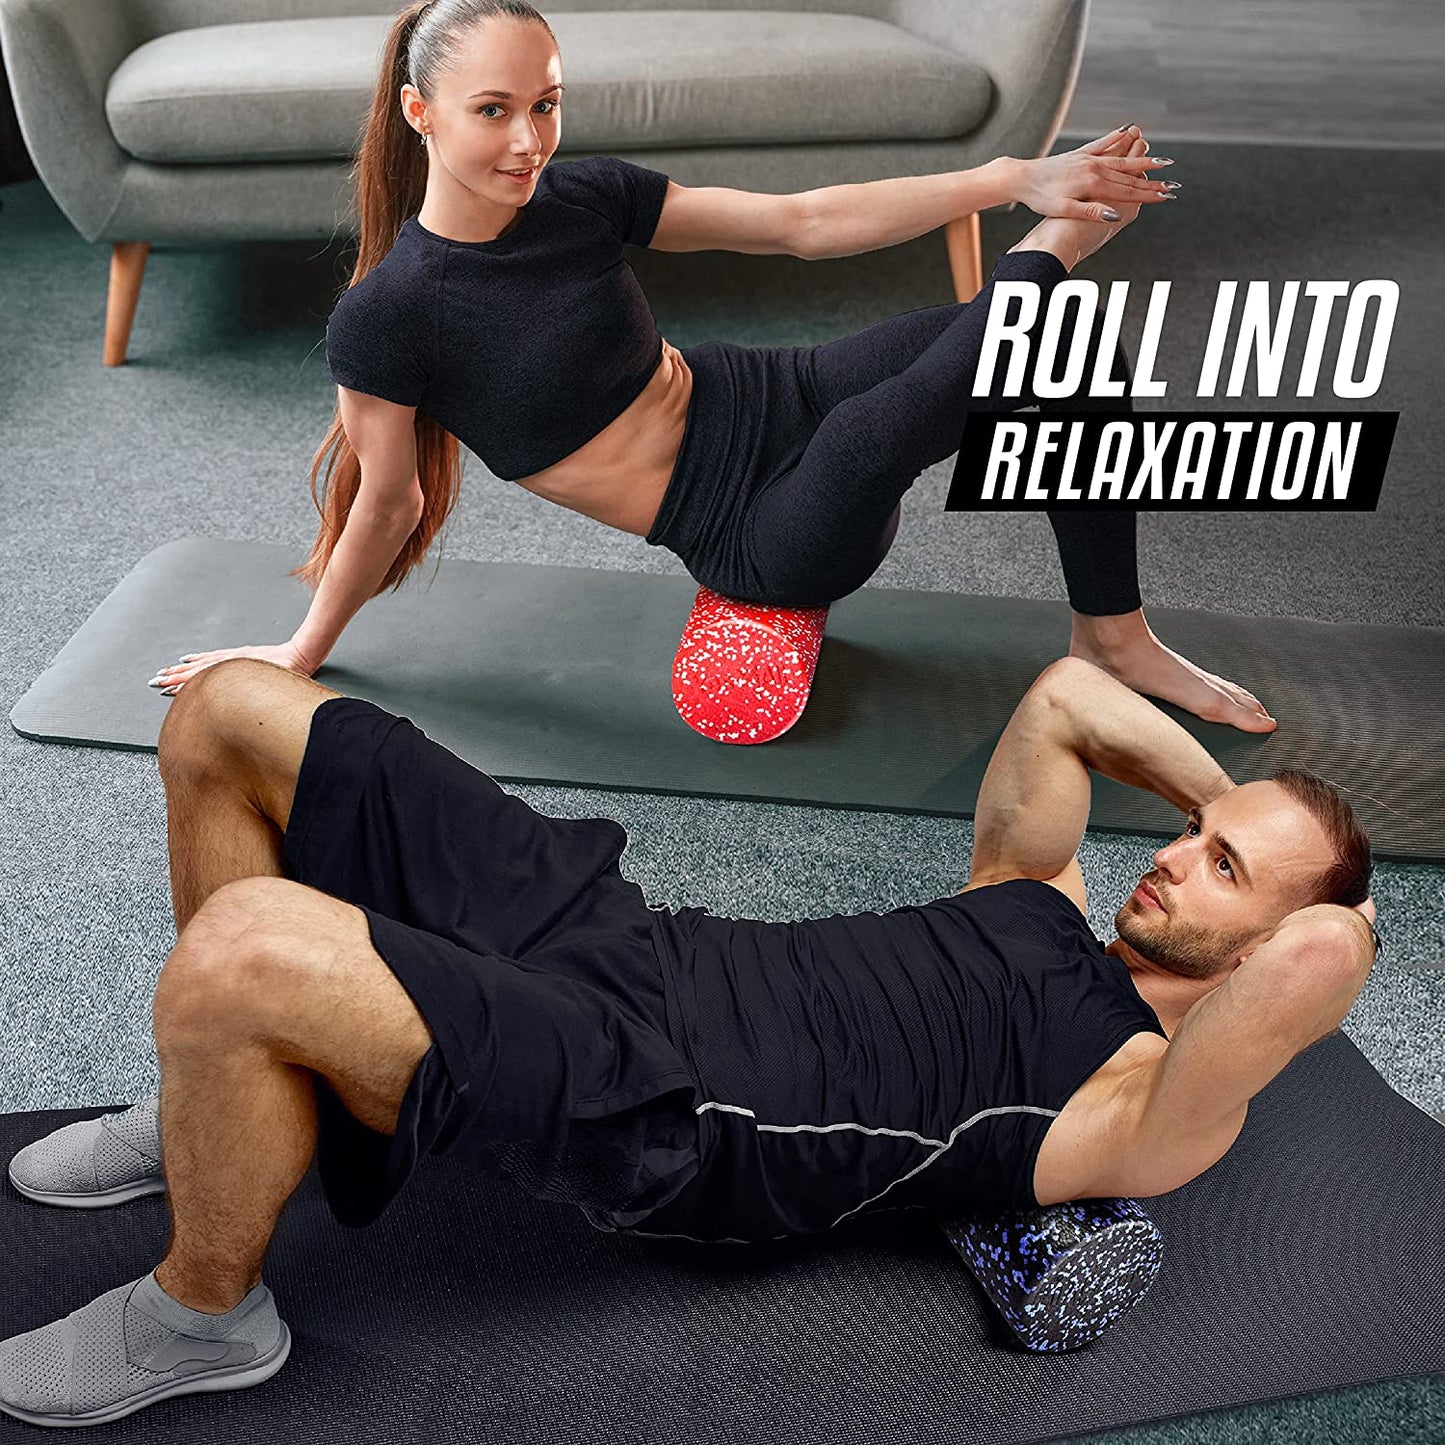 EPP Foam Roller for Back, Legs, Physical Therapy, Exercise, Deep Tissue, and Muscle Massage – Extra Firm High-Density Foam Roller – Support Pain Relieved, Back, Legs, and Muscle Recovery